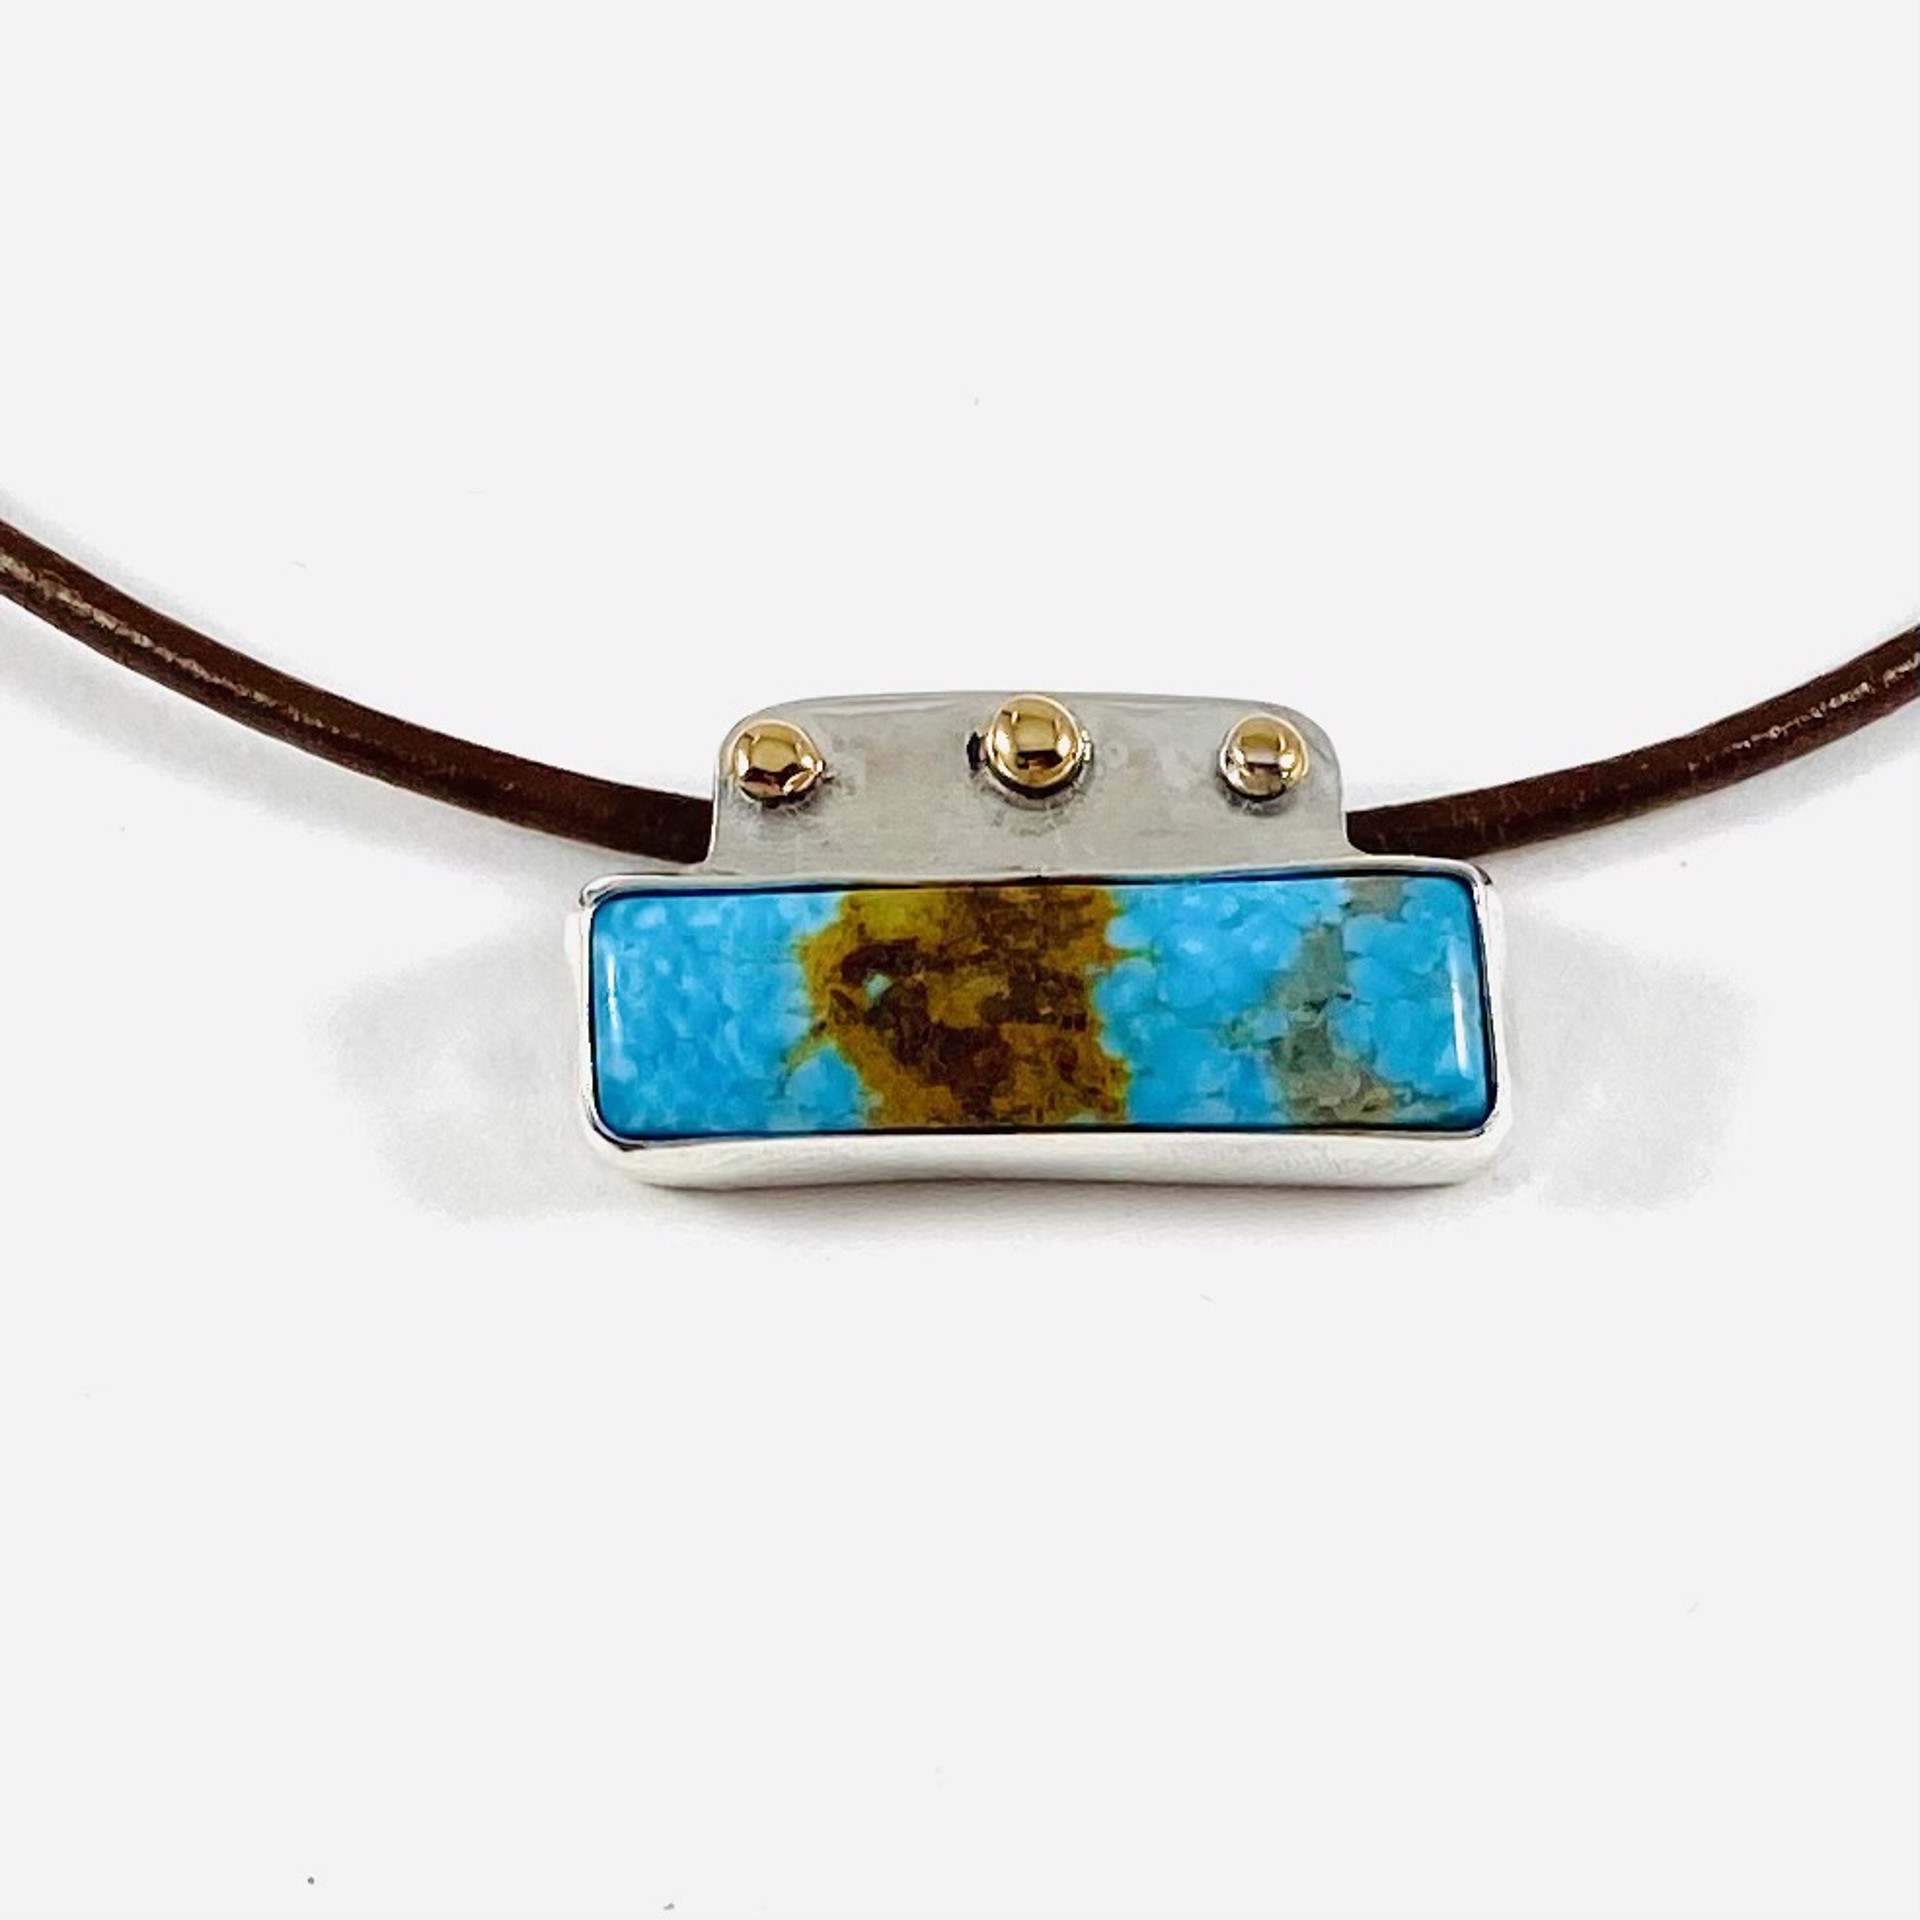 Kingsman Turquoise and Bronze, Silver Pendant on Leather Necklace AB21-3 by Anne Bivens